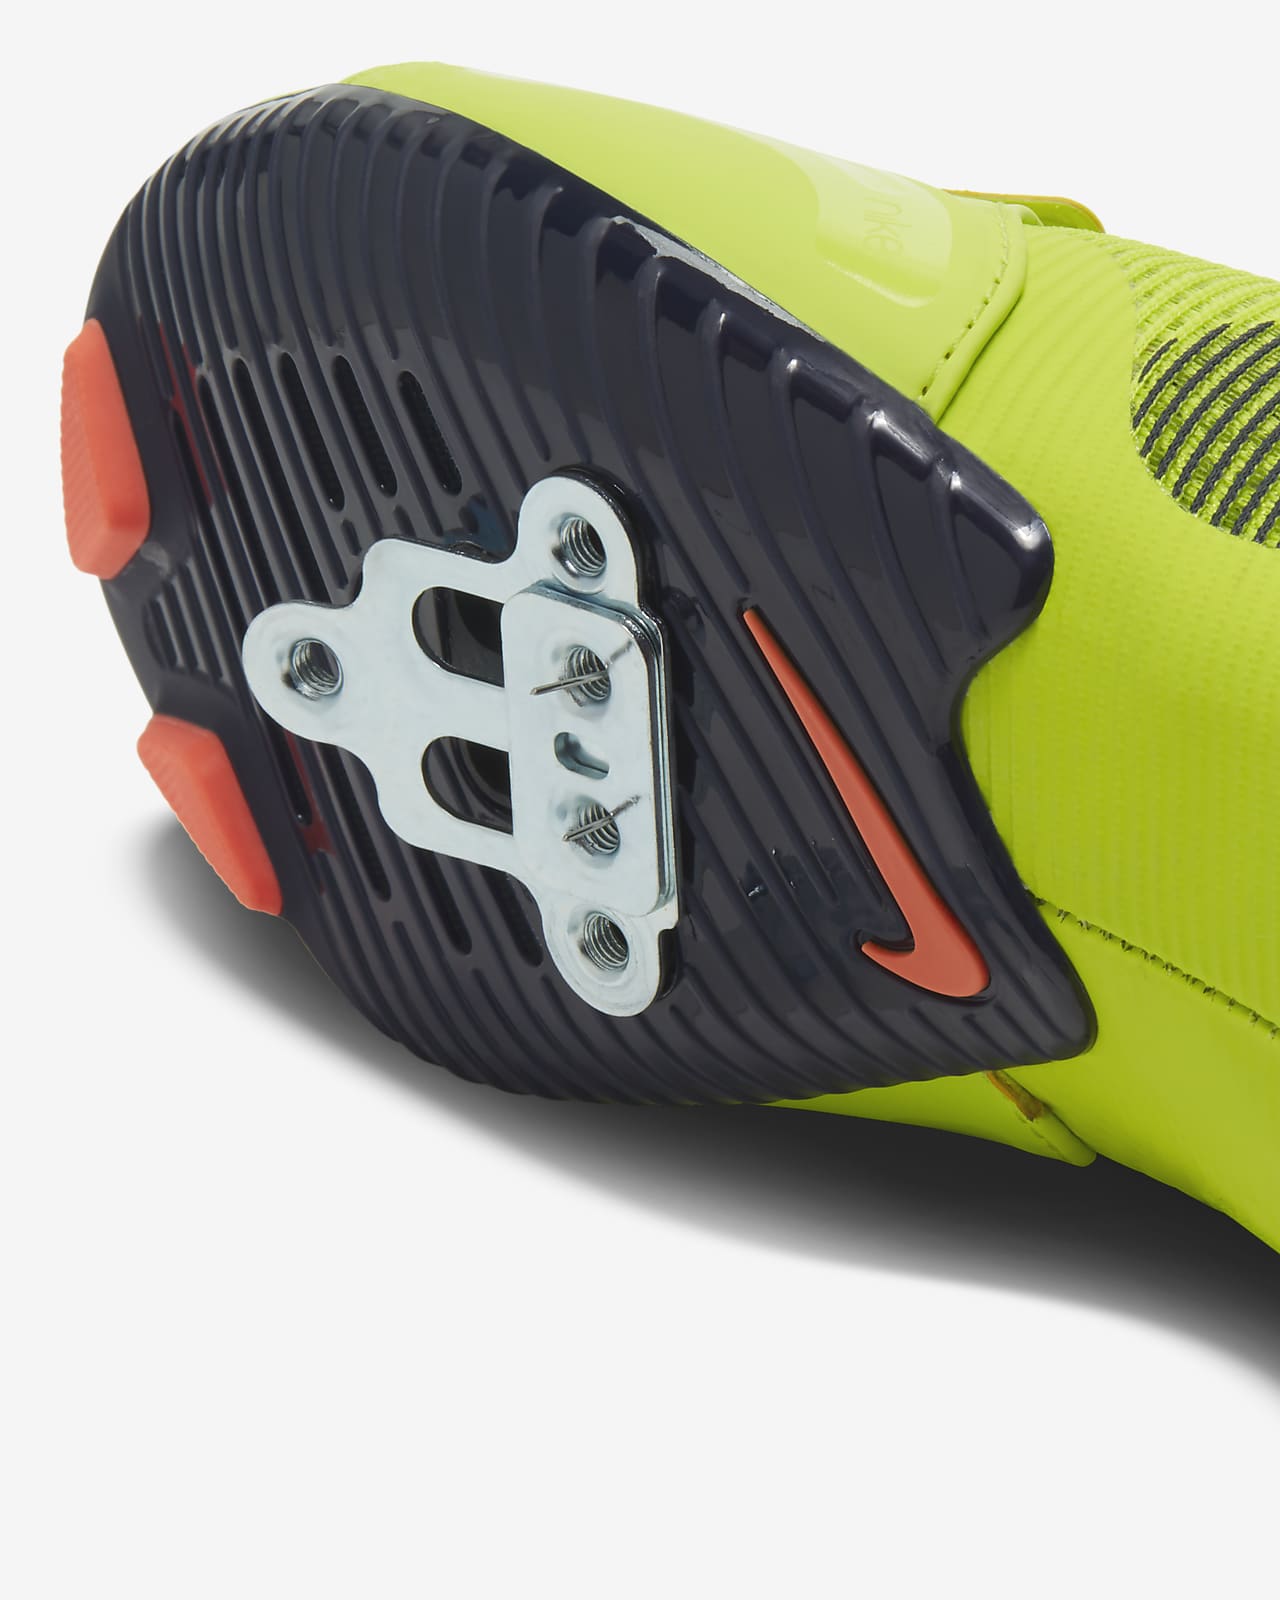 nike superrep cycling shoes